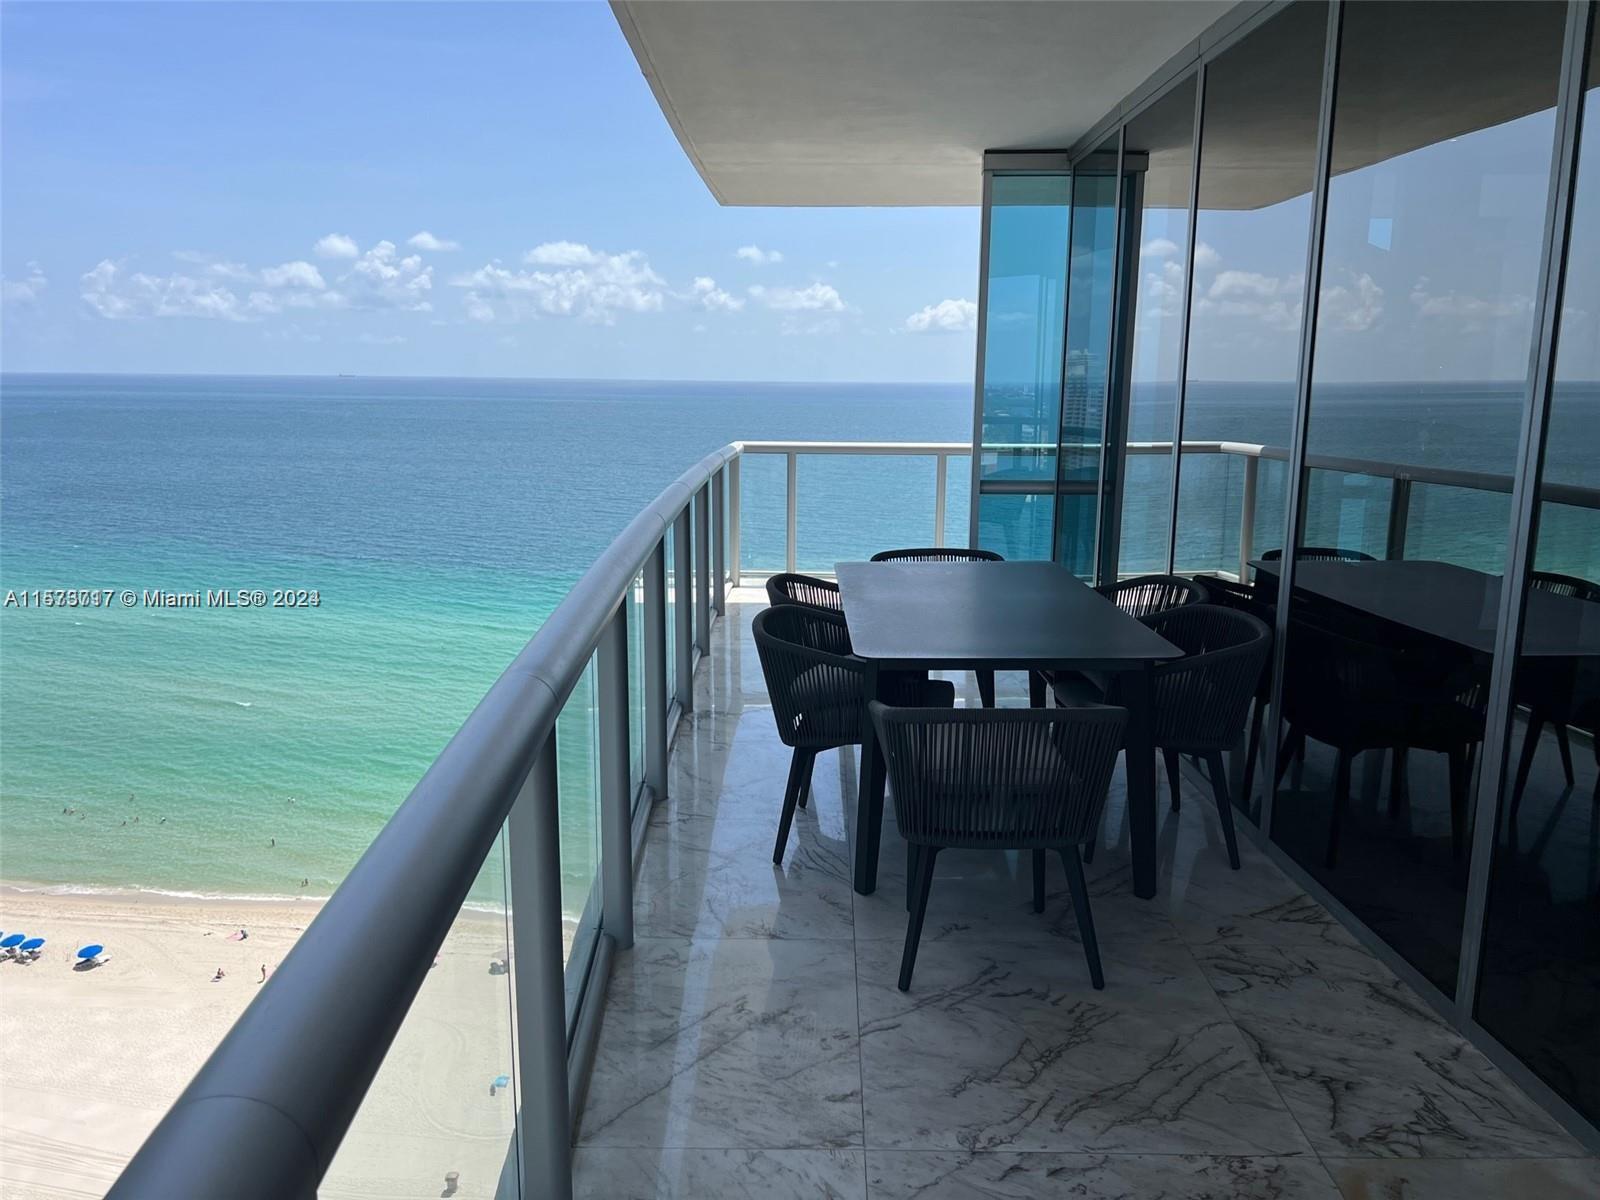 Oceanfront luxury condo at Jade Ocean in beautiful Sunny Isles Beach. Bang And Olufsen Electronics, Interior features 3 bedroom, 3 and a half baths, kitchen, dining room, in unit laundry and a large patio facing the ocean